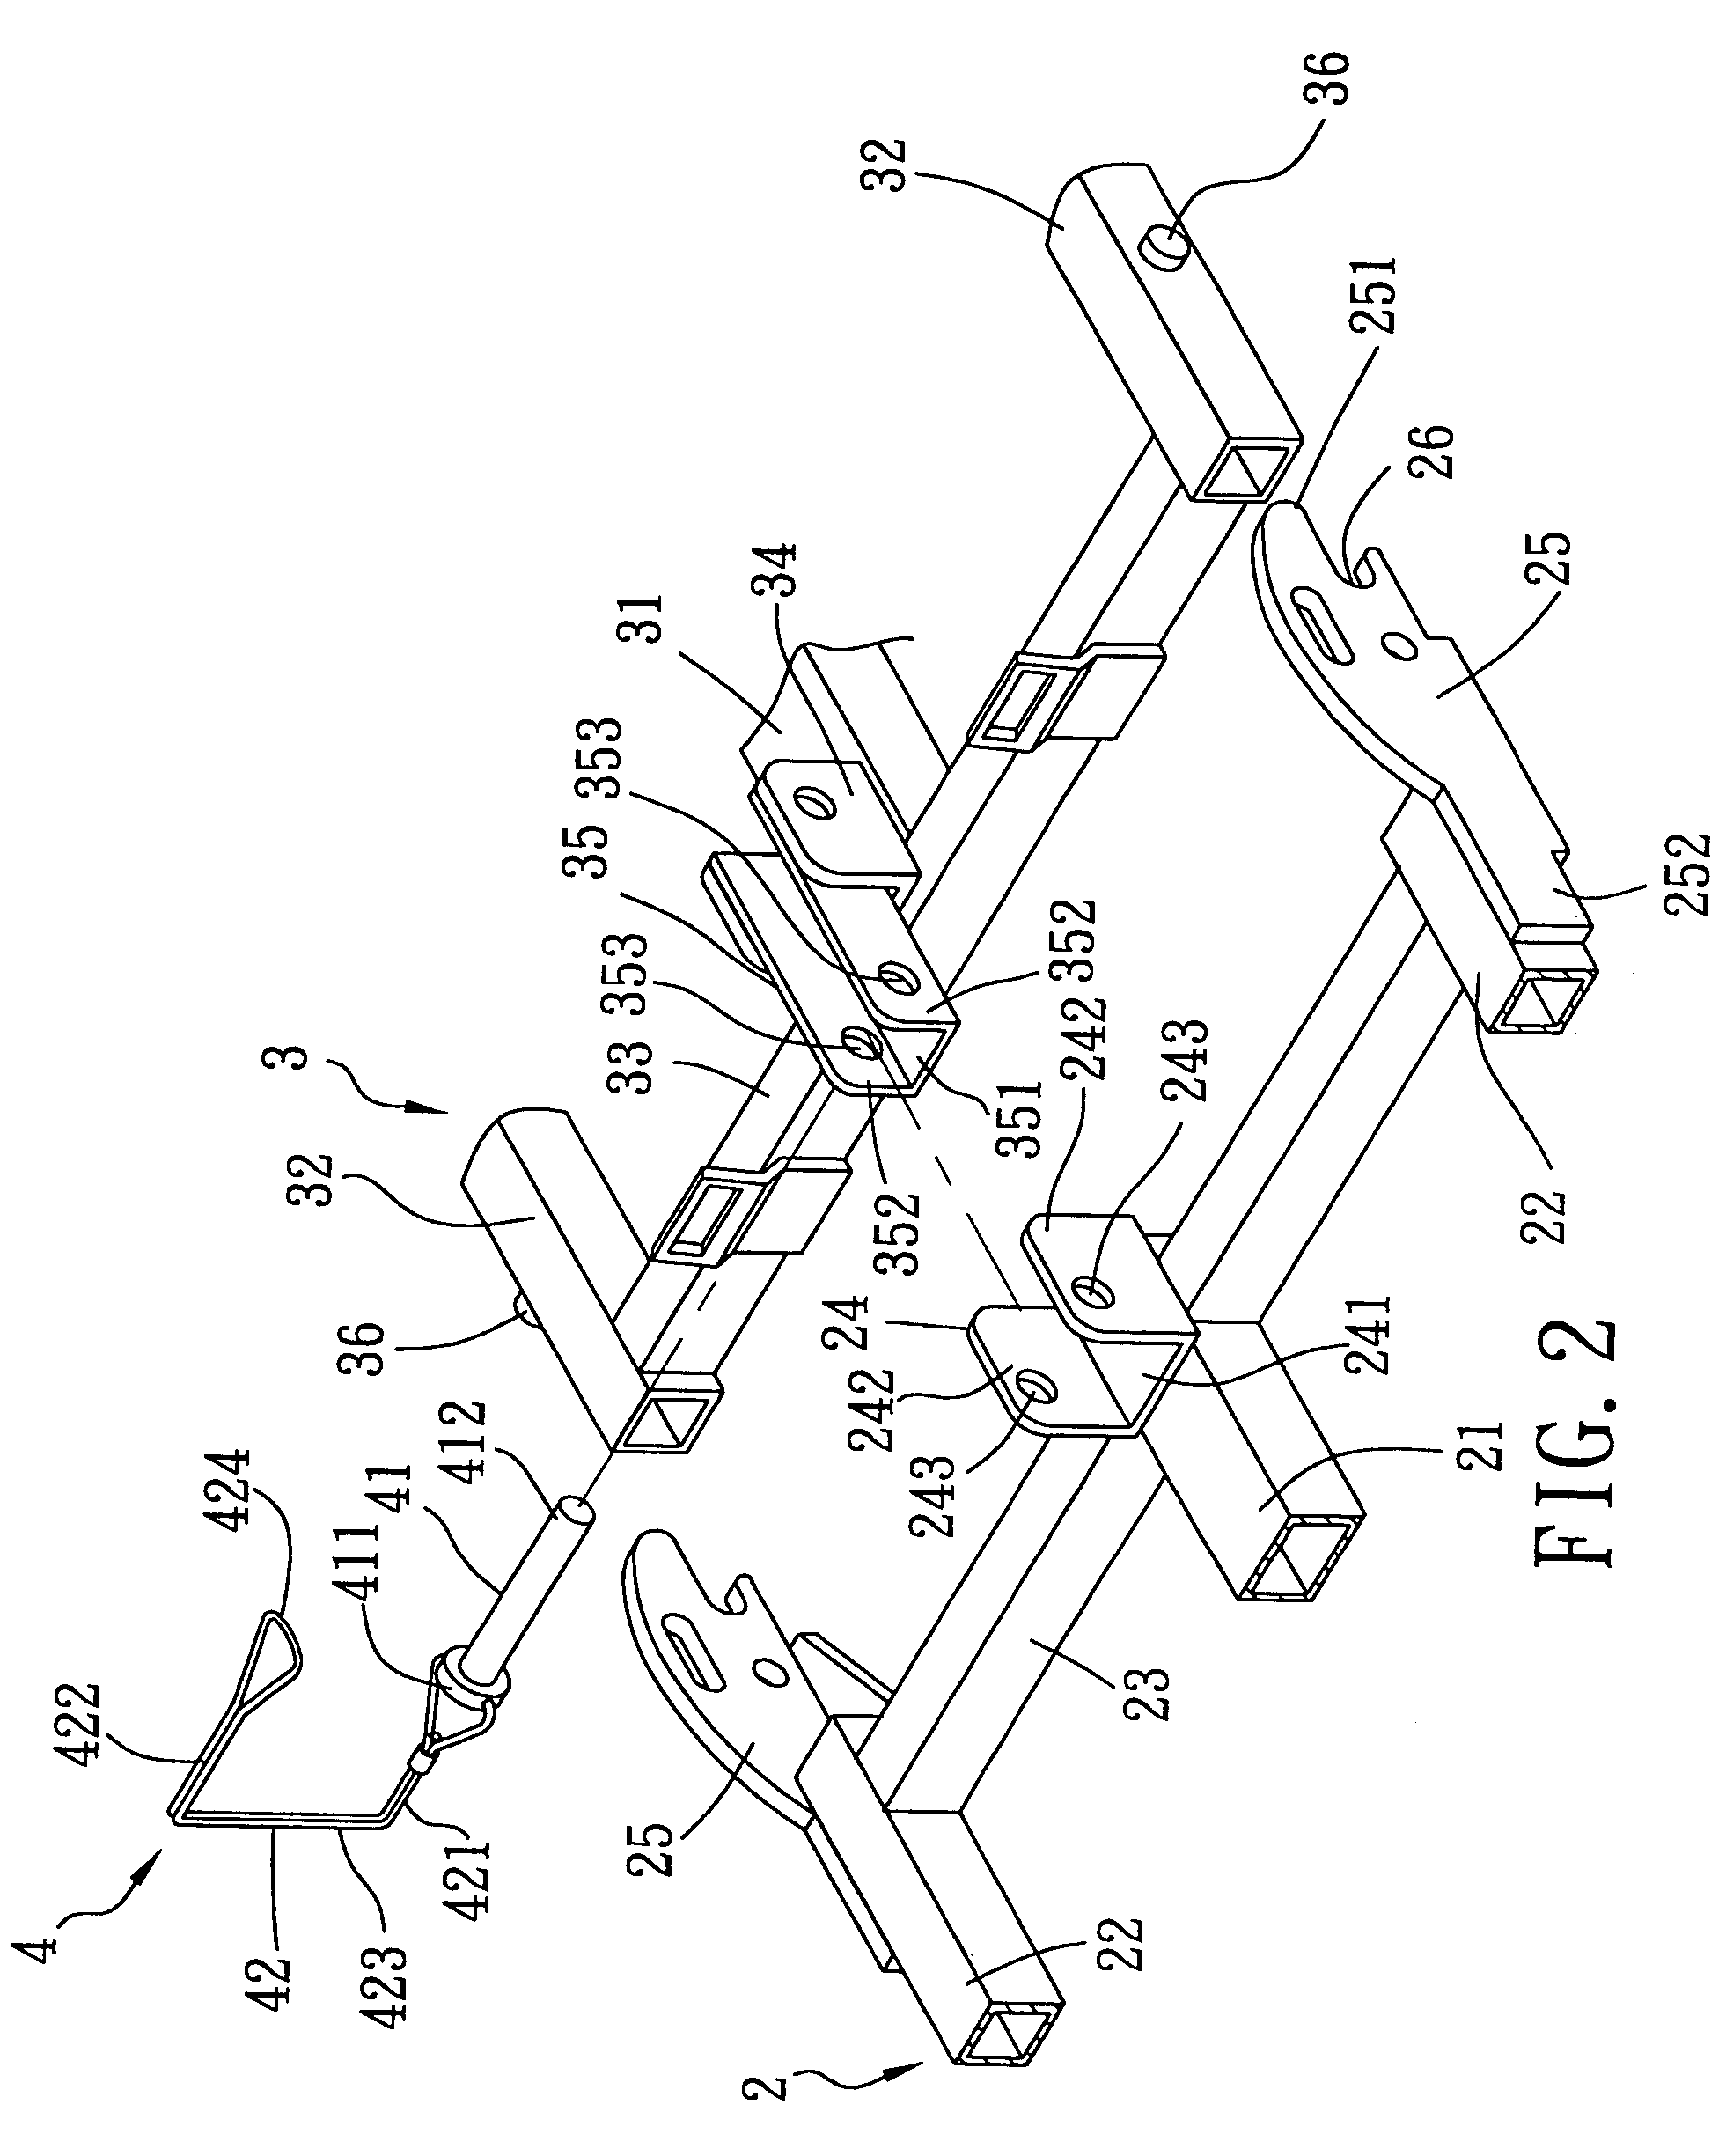 Vehicle chassis having a locking device for securing connection between first and second chassis members